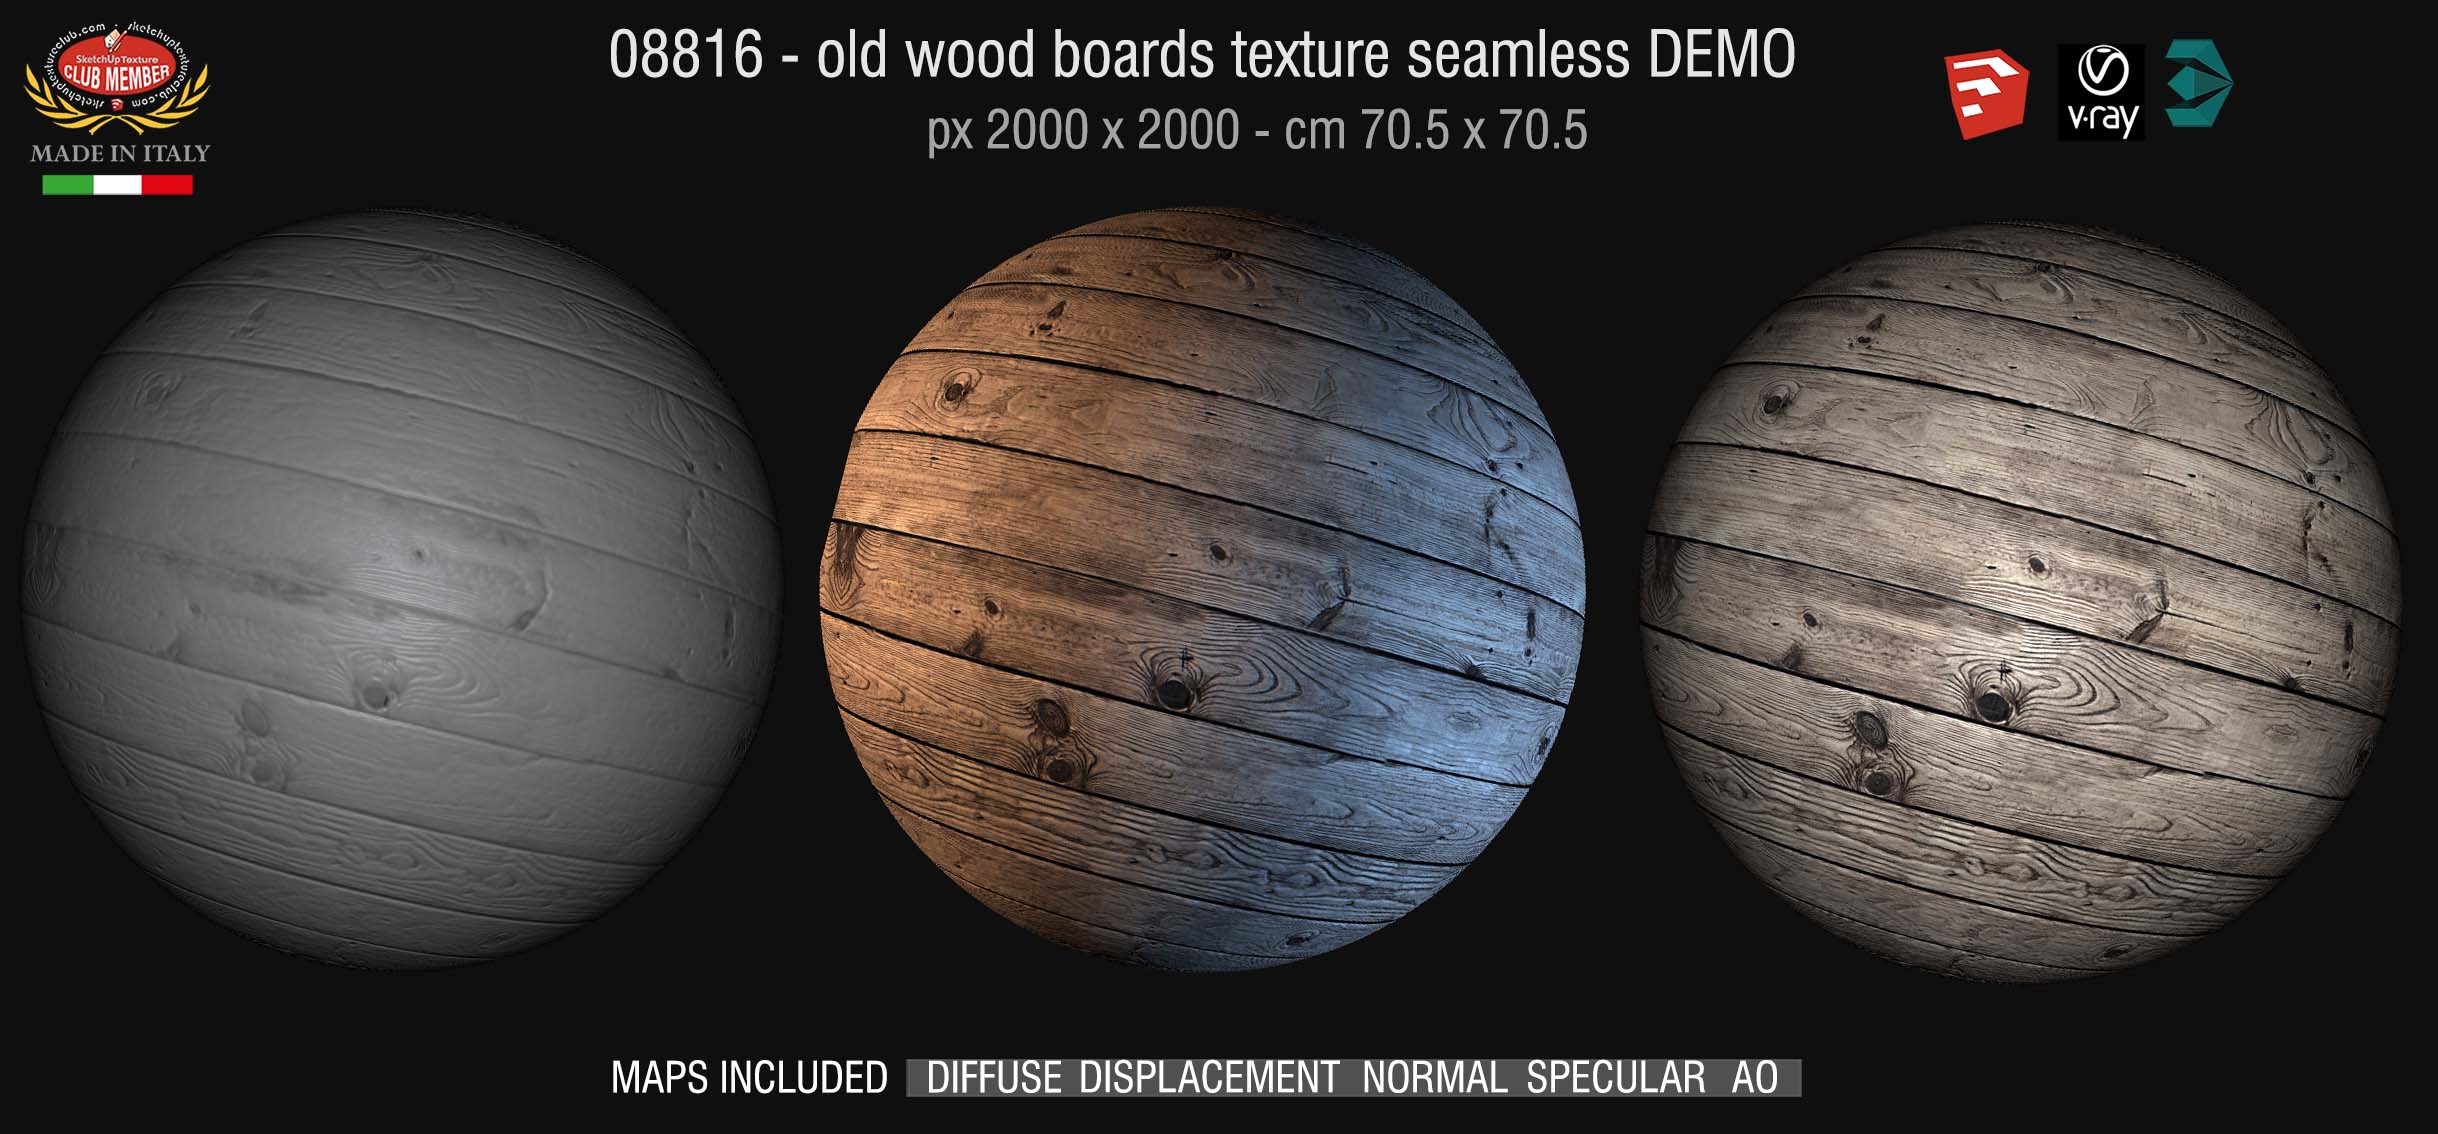 08816 HR Old wood boards texture seamless + maps DEMO